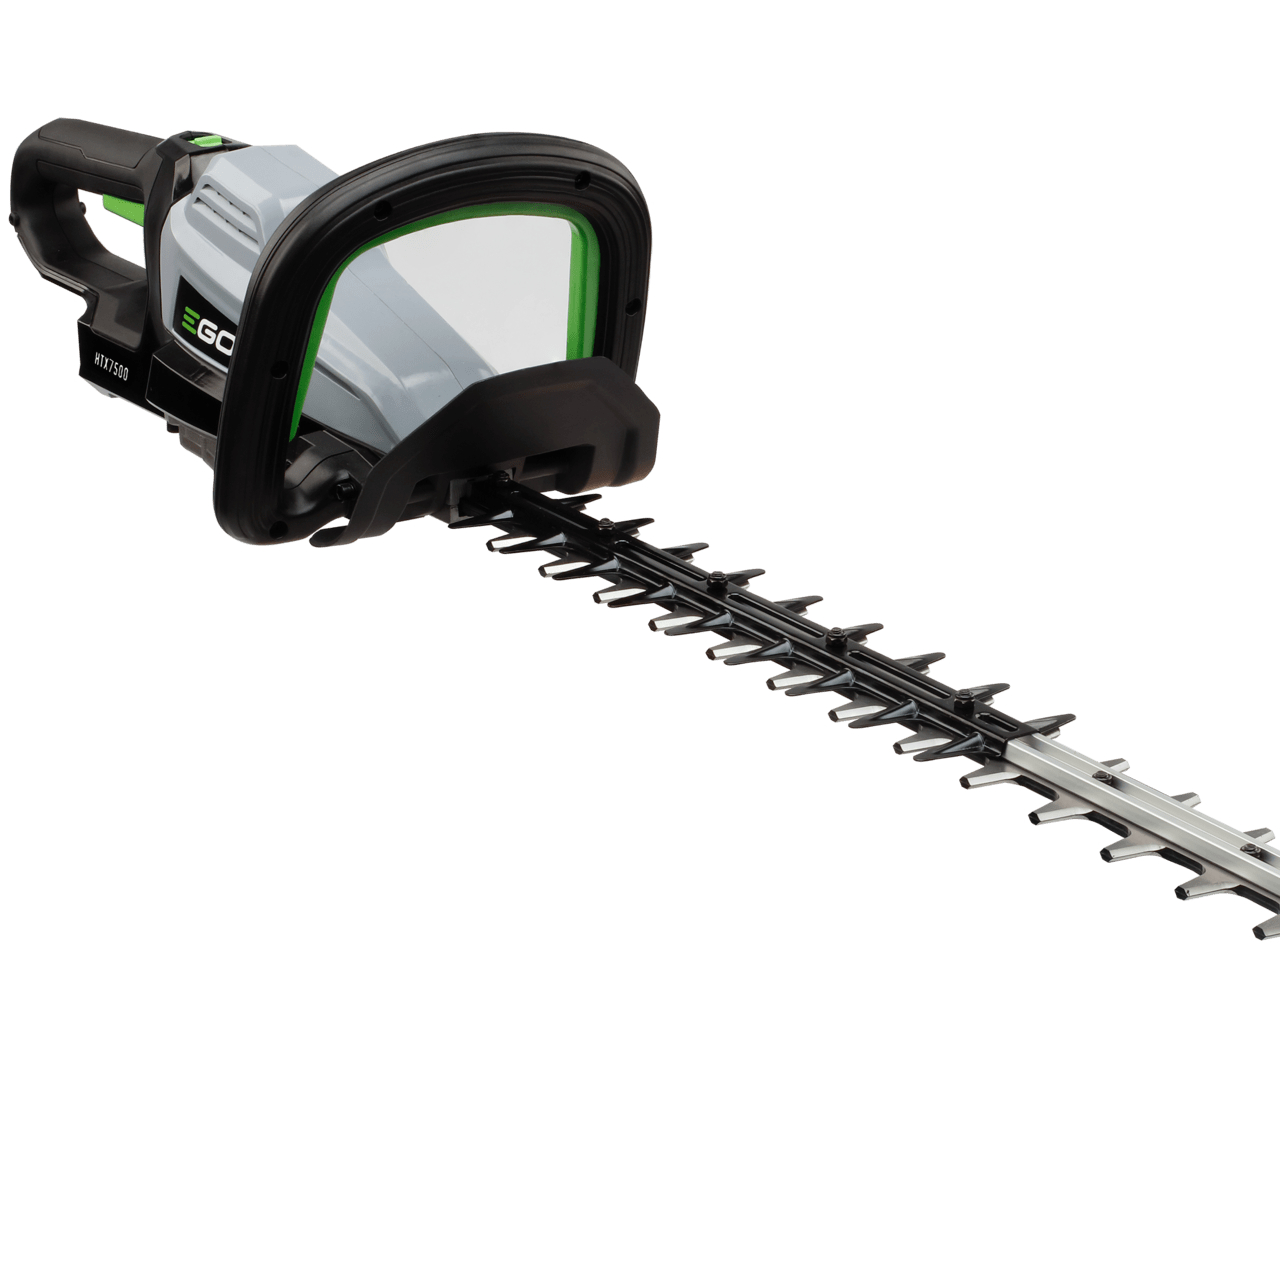 ego-htx7500-professional-x-hand-held-hedge-trimmer-75cm-bare-tool